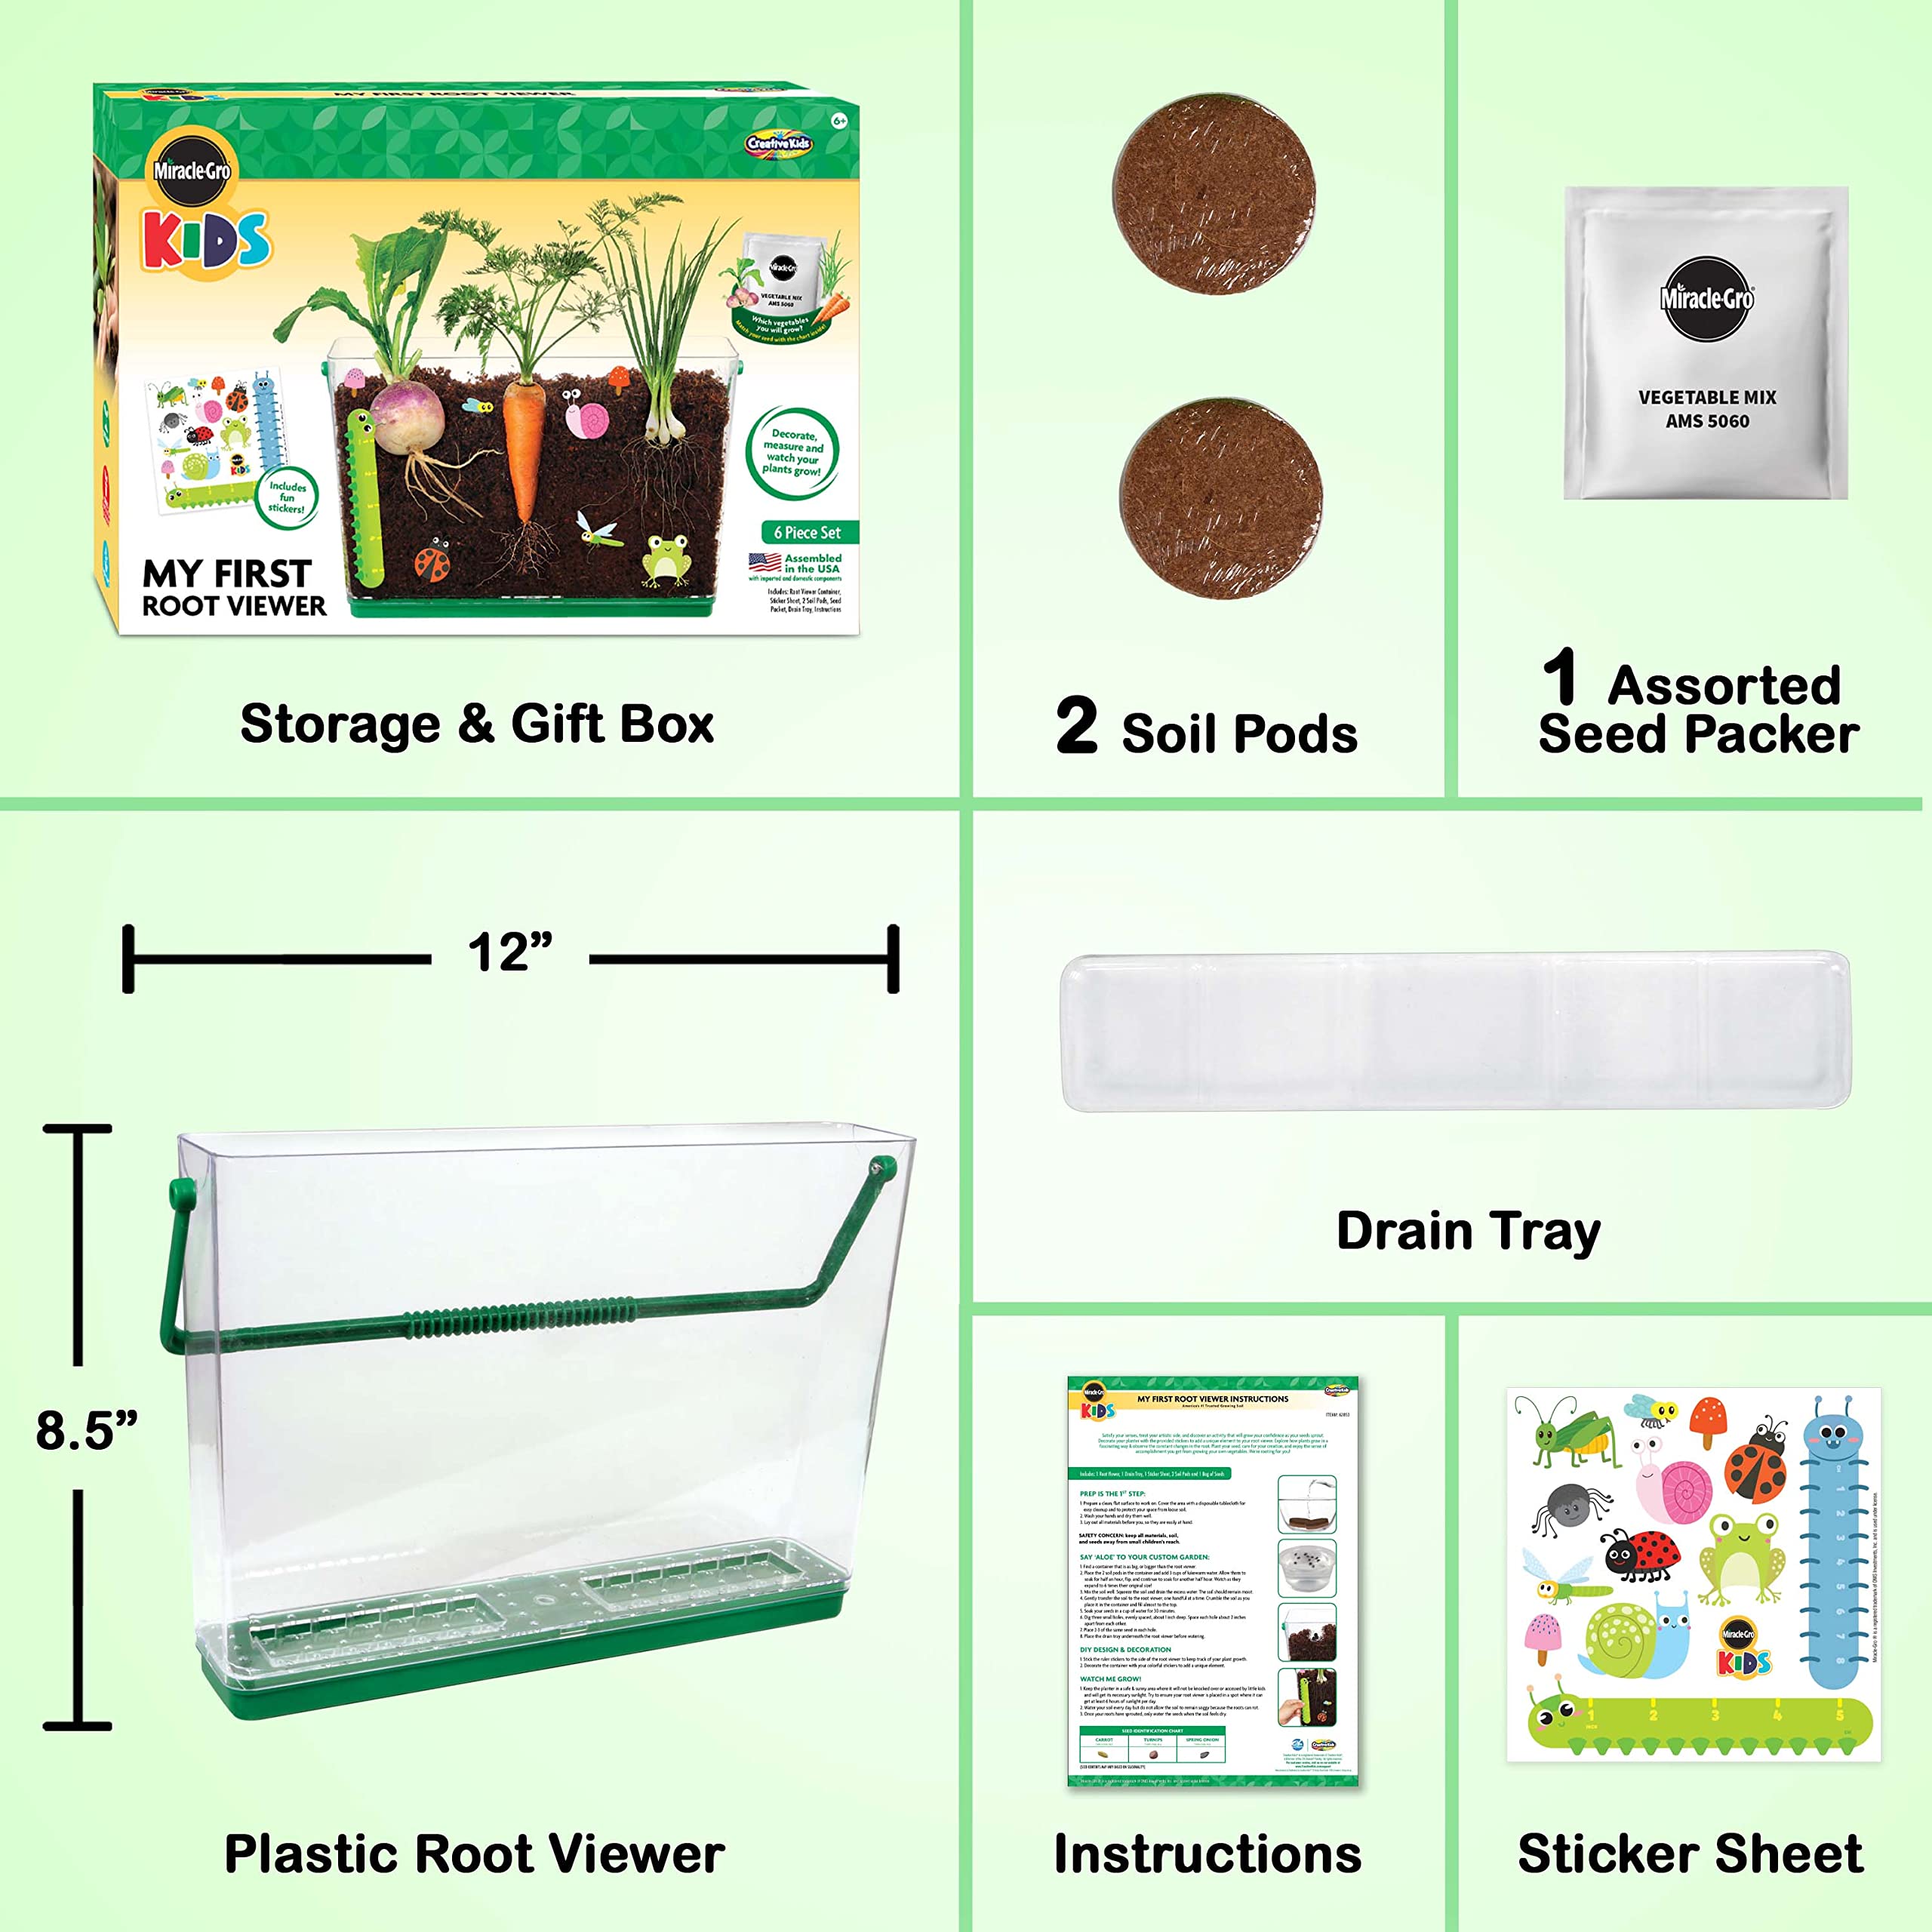 Miracle GRO My First Root Viewer- Decorate & Plant Your Own Garden - Science Kit for Kids - Soil & Vegetable Seeds Included - STEM Educational Teens Kids Gardening Set Age 6+, Multicolor